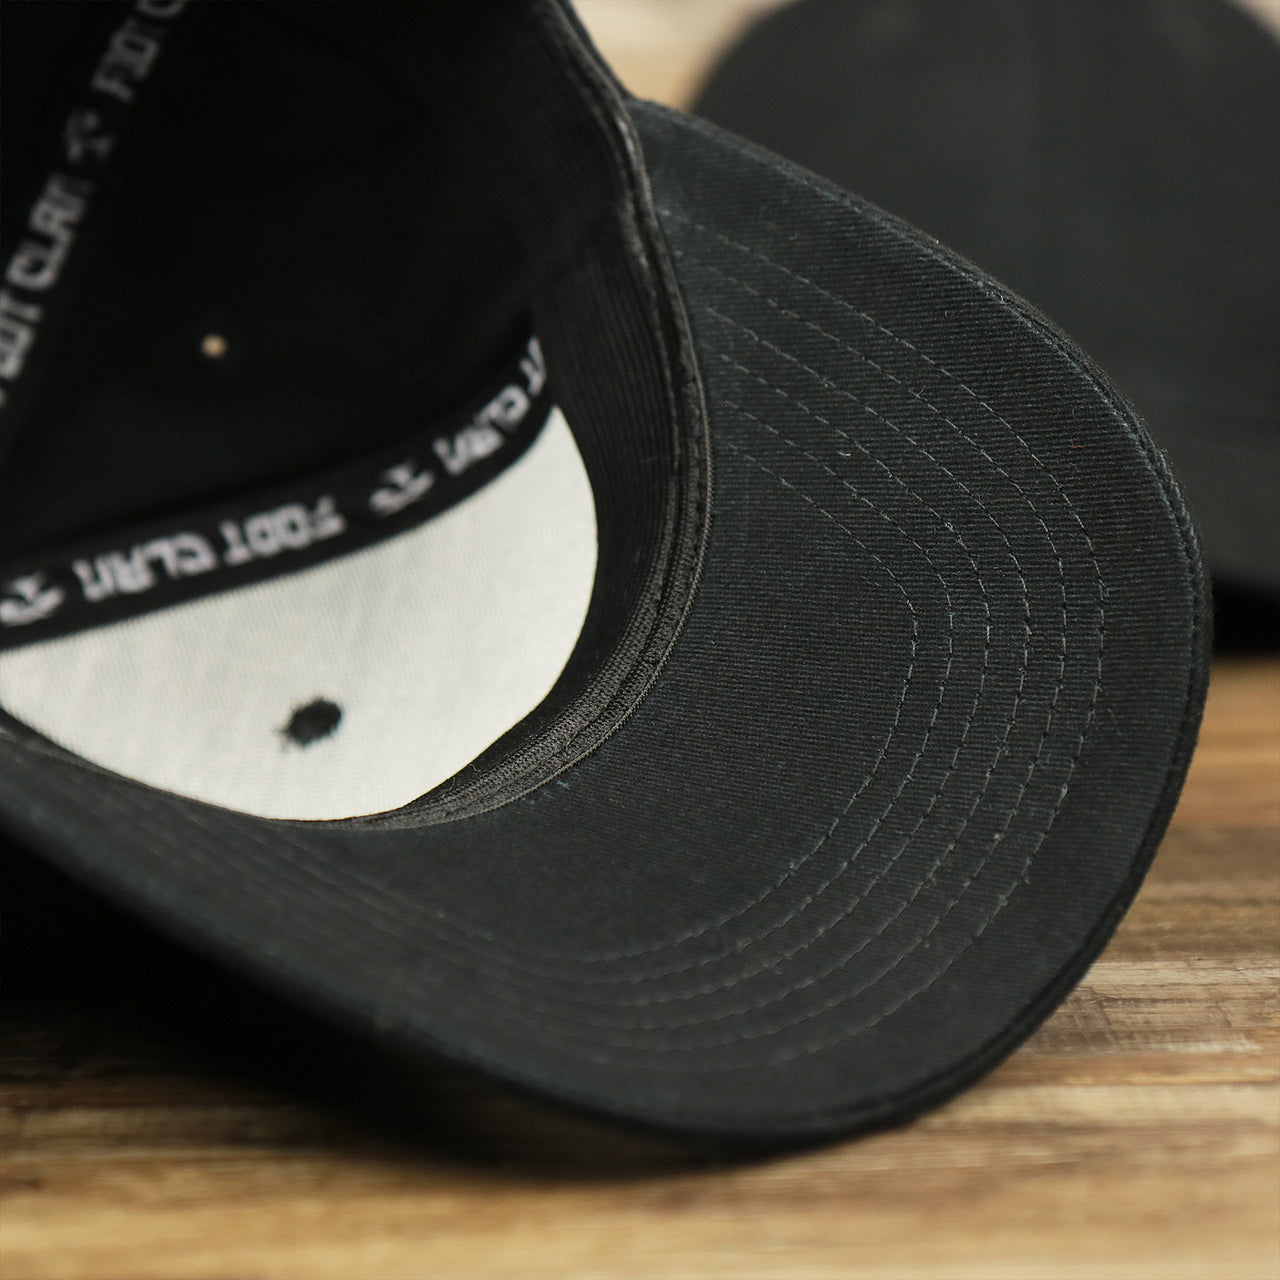 The undervisor on the Jet Black Structured Cotton Blank Small Fit Flexfit Cap | Black Stretch Fit Caps